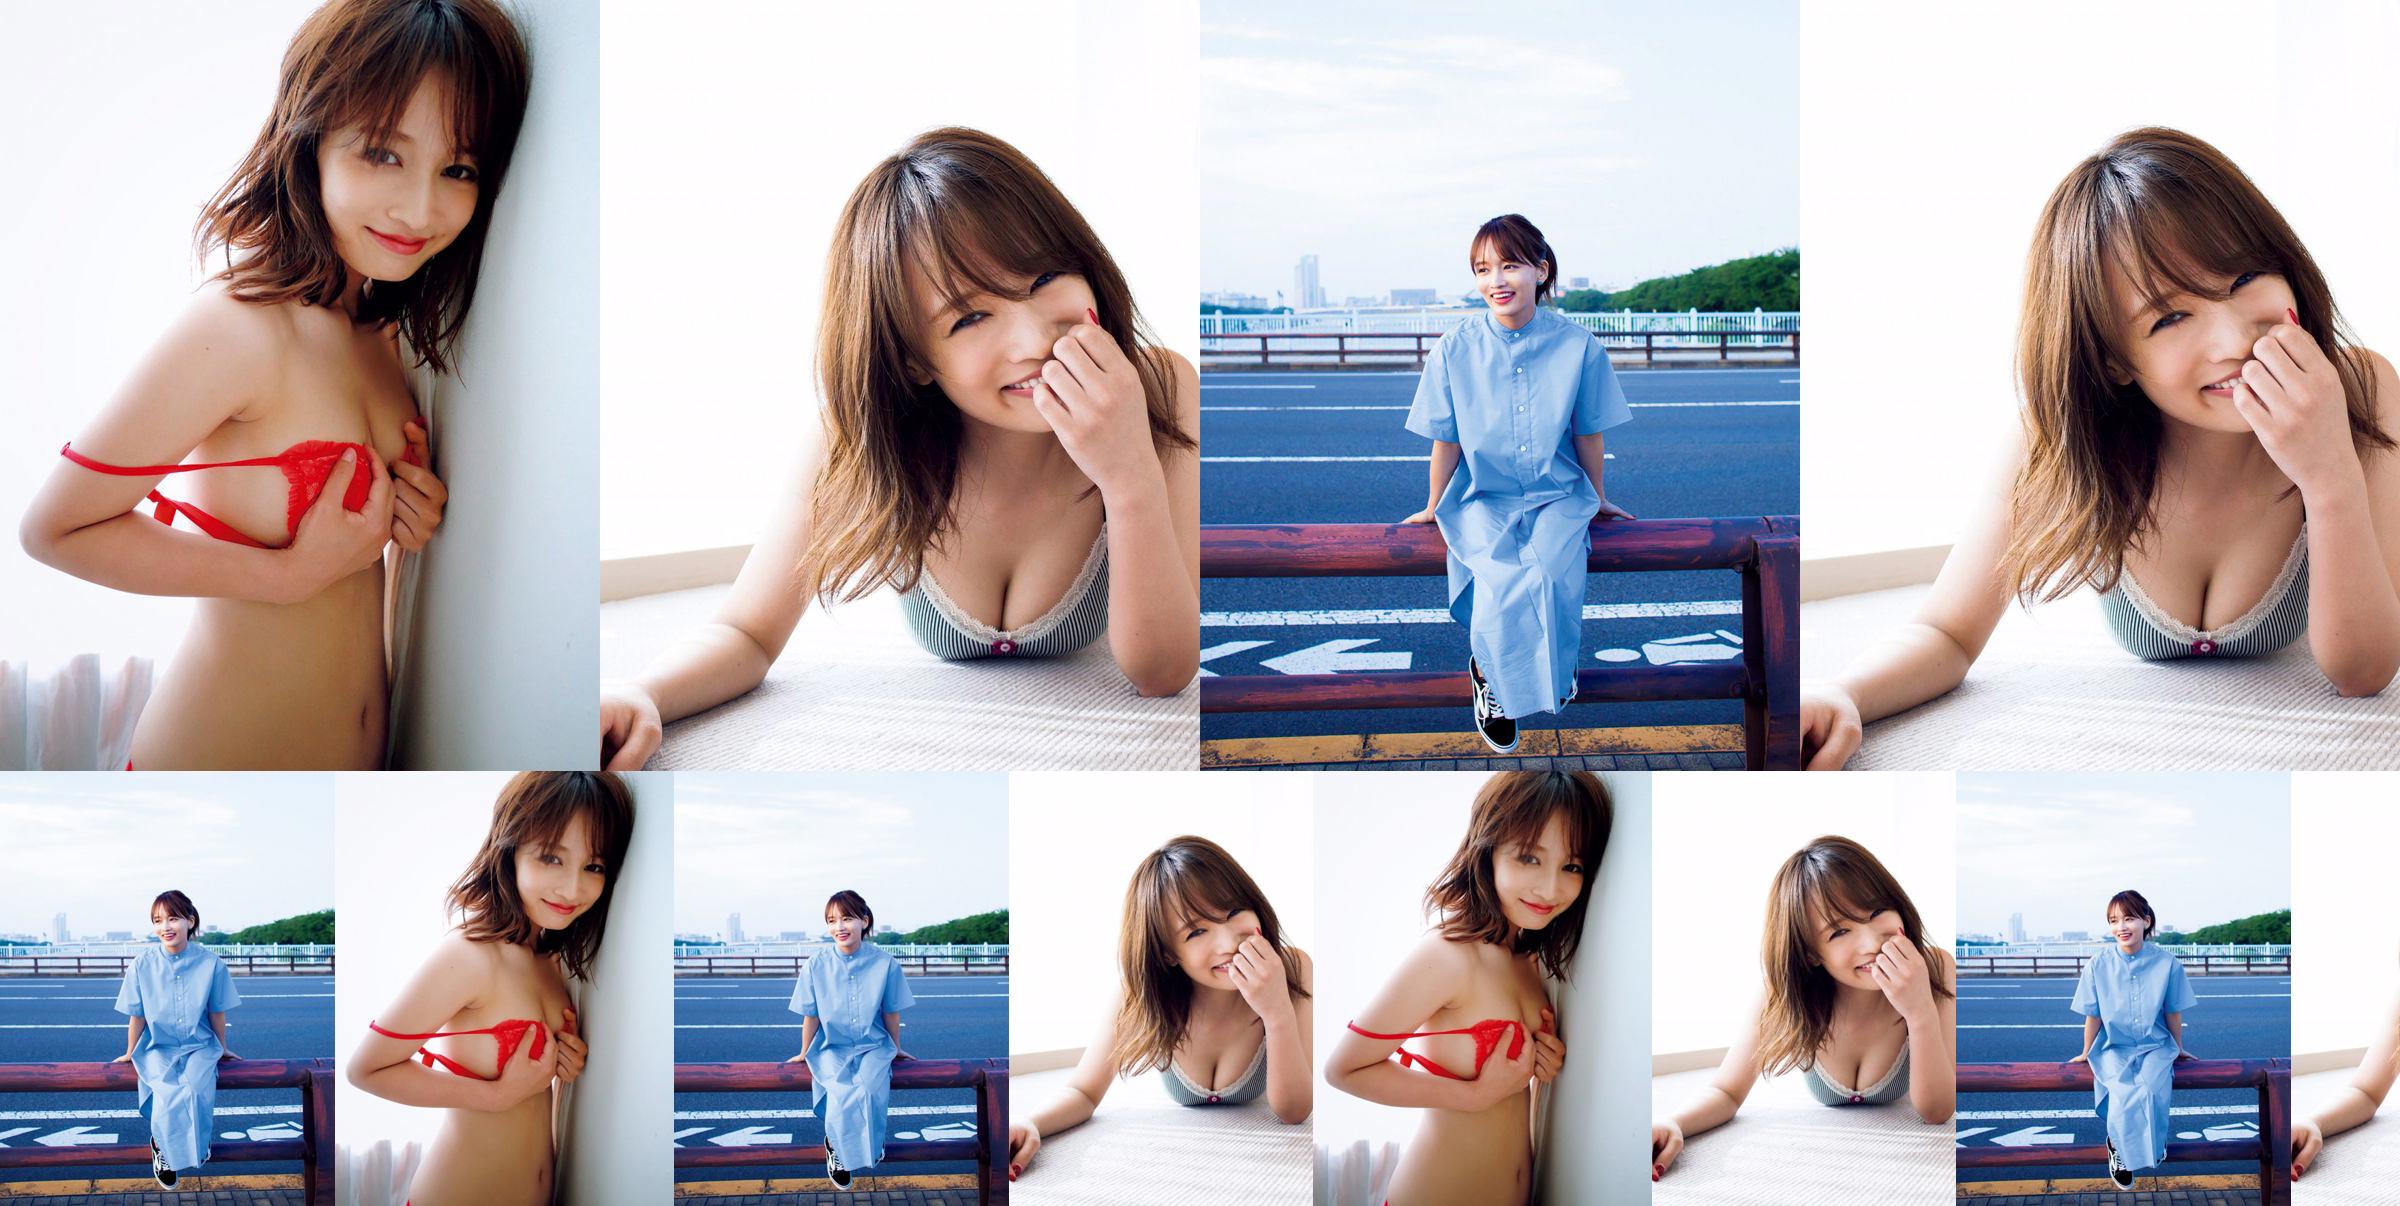 [FRIDAY] Mai Watanabe "F cup with a thin body" photo No.5a844a Page 1